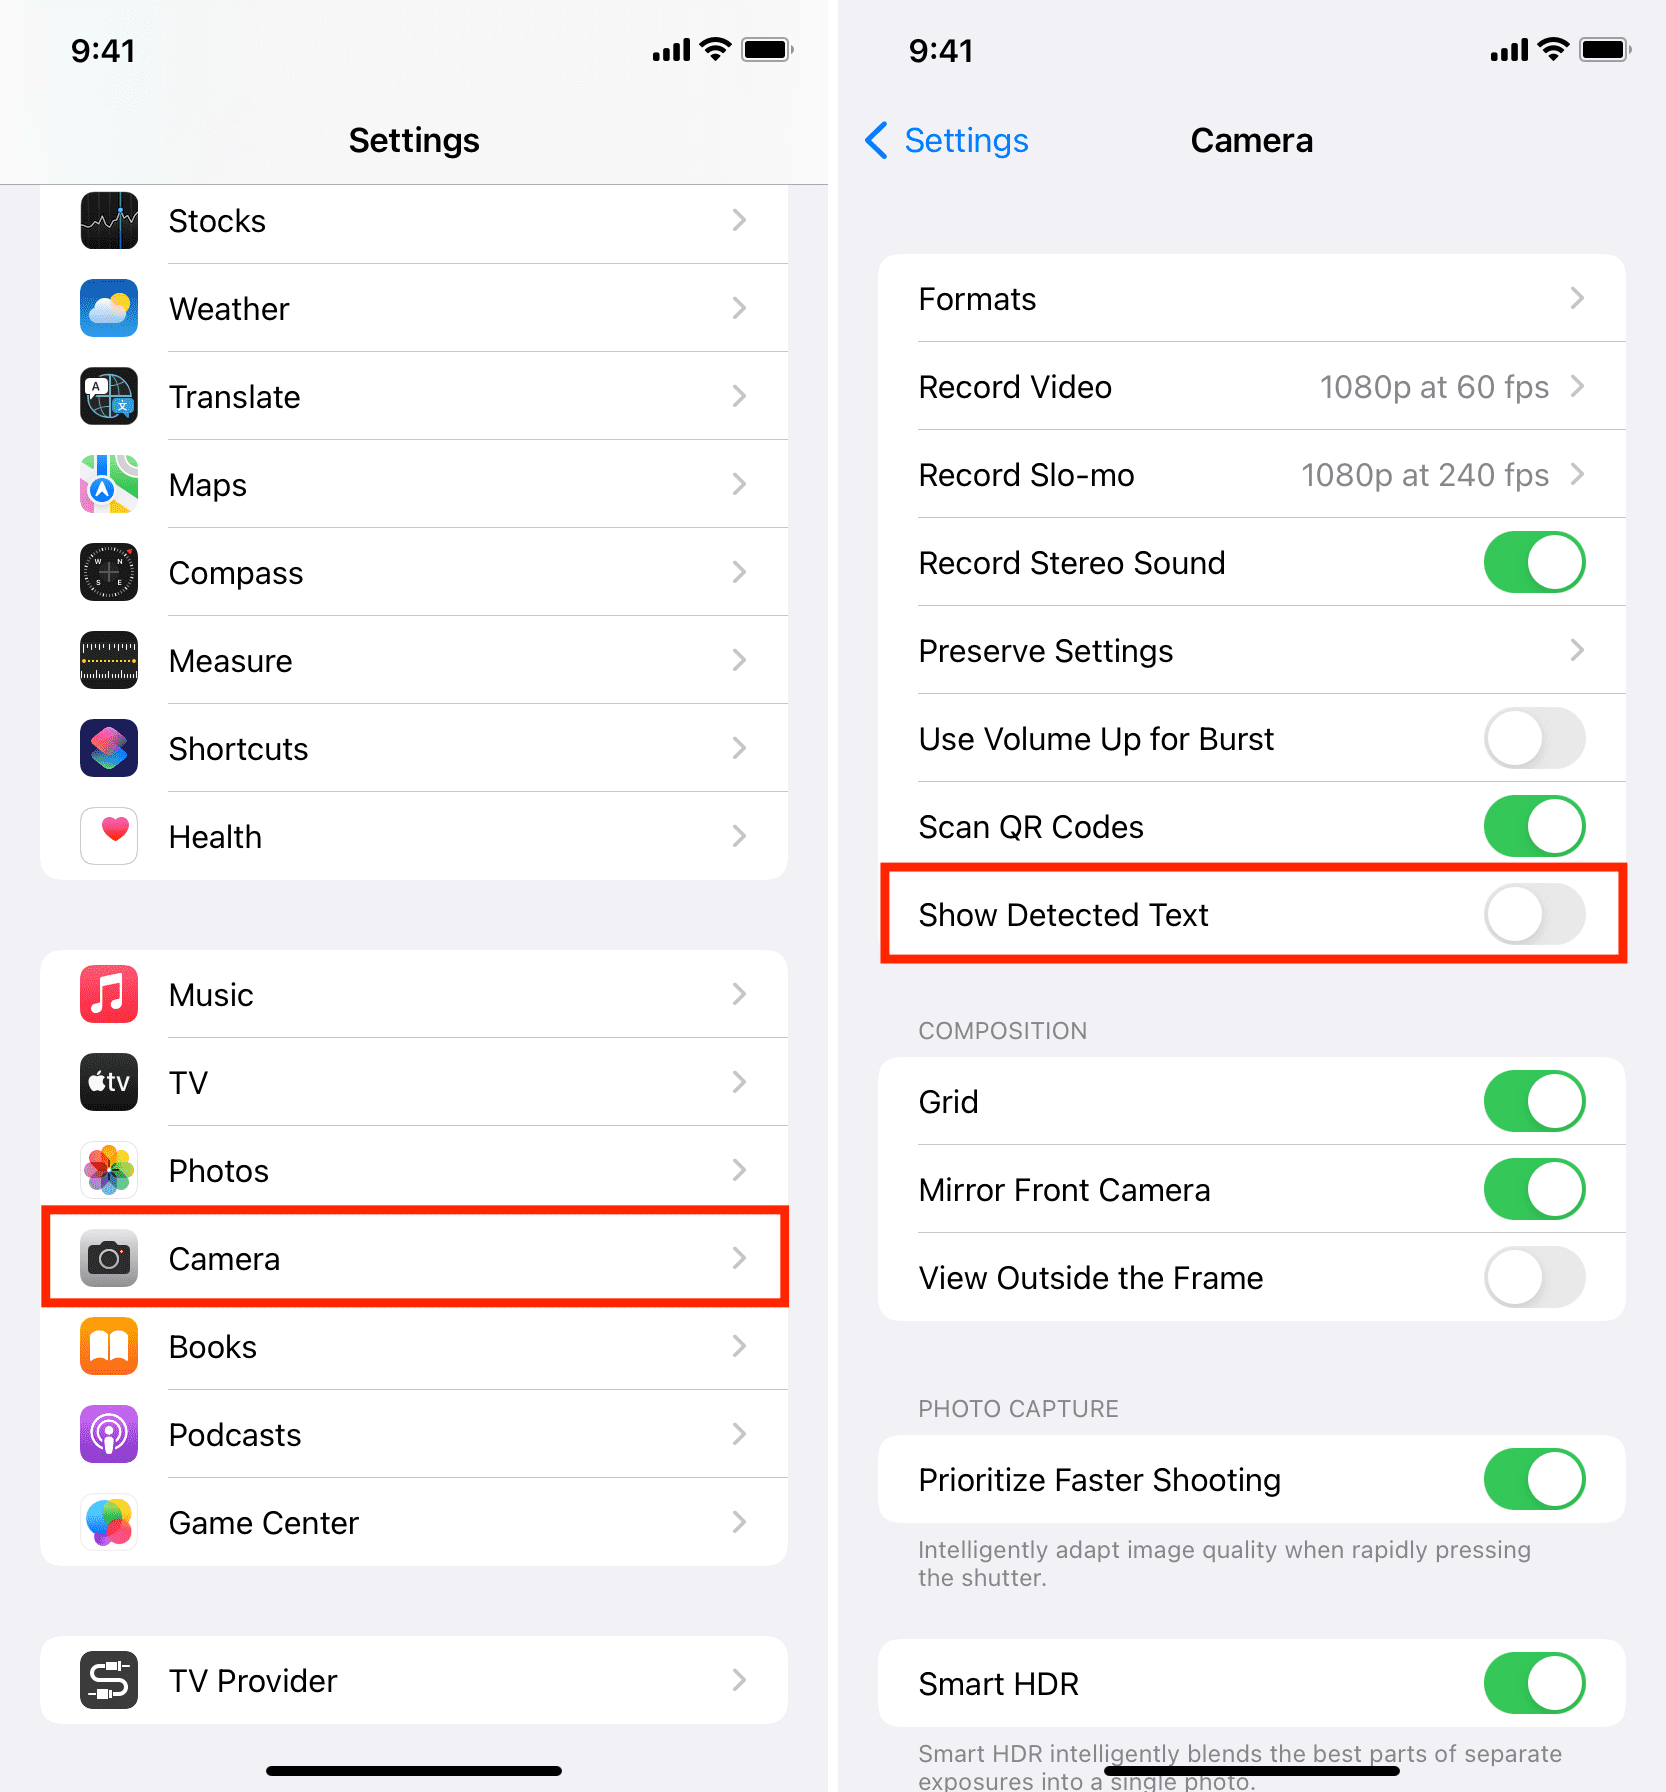 Show Detected Text in Camera Settings on iPhone